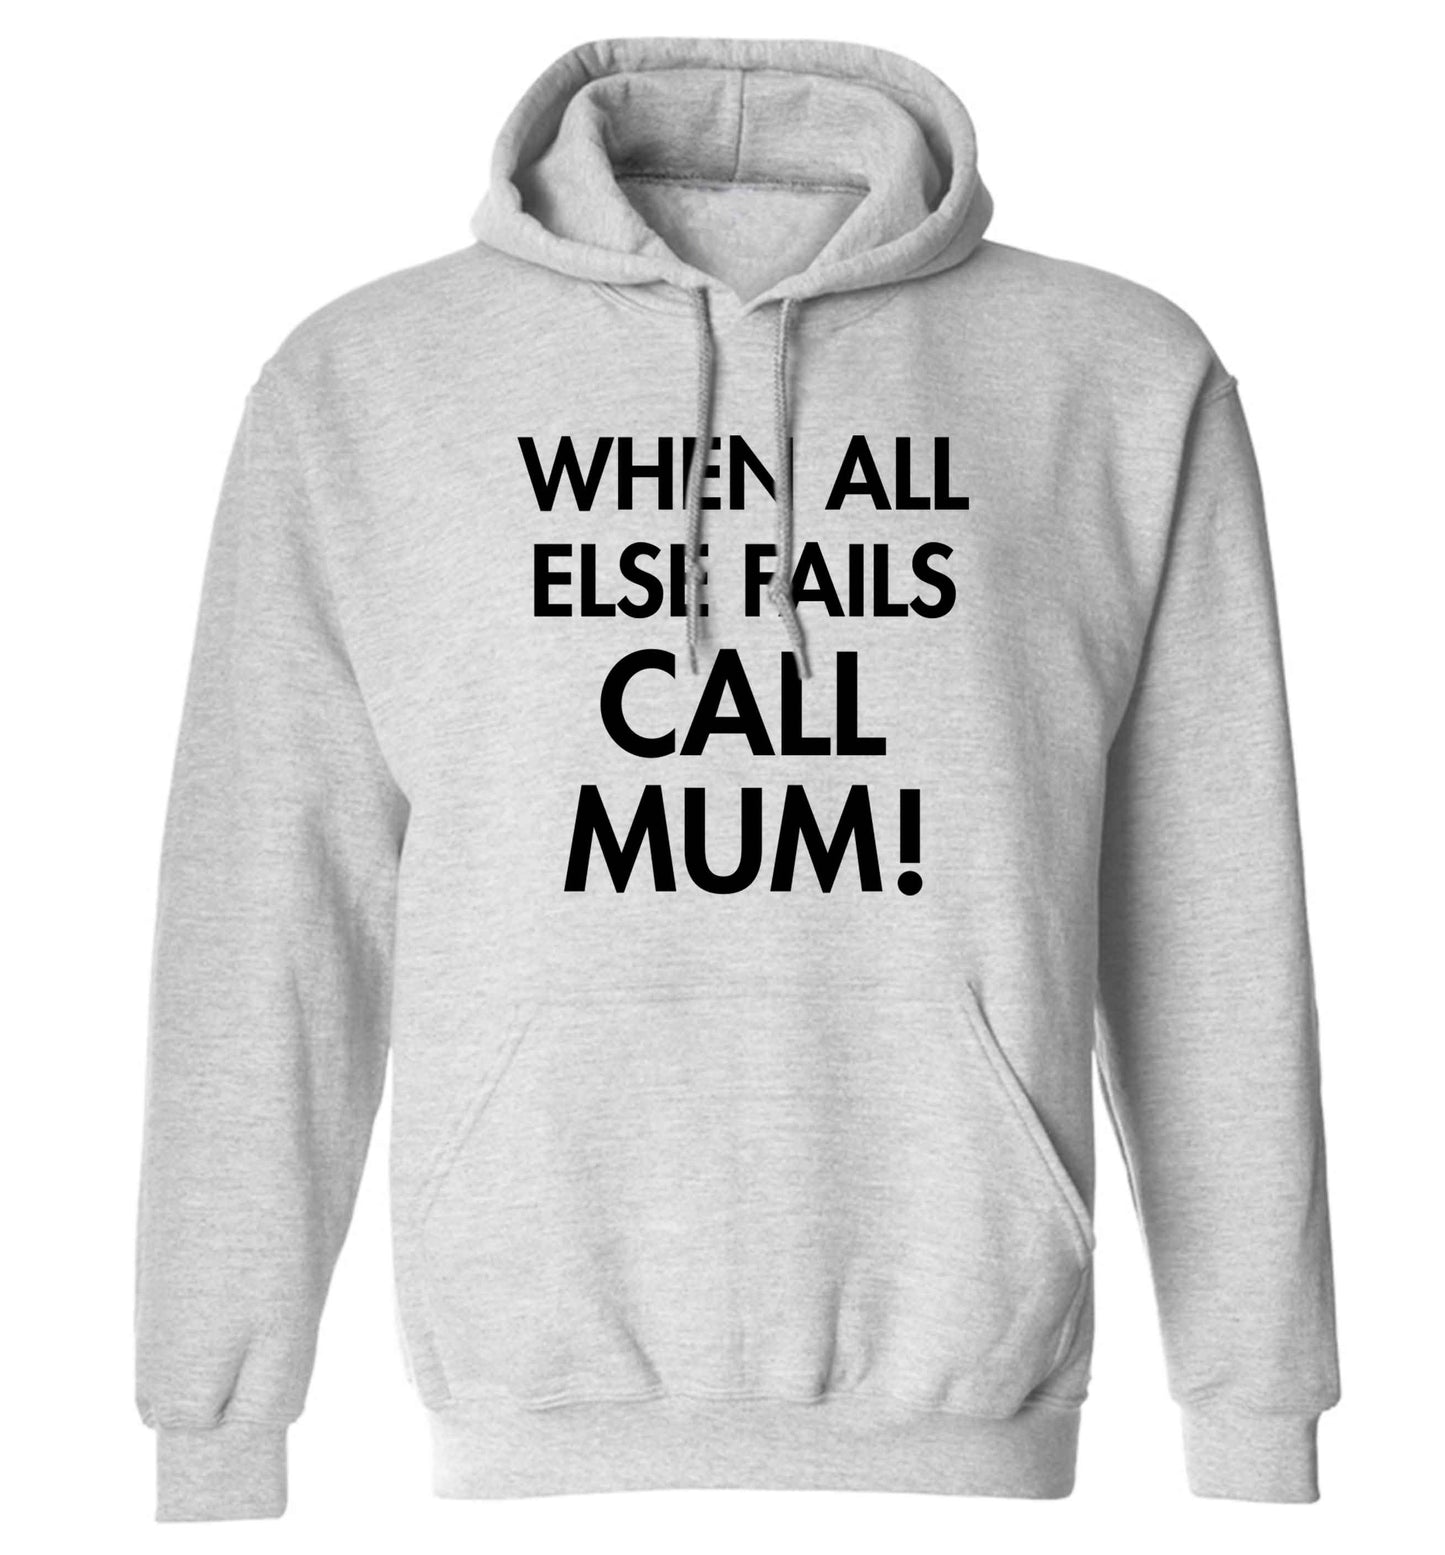 When all else fails call mum! adults unisex grey hoodie 2XL